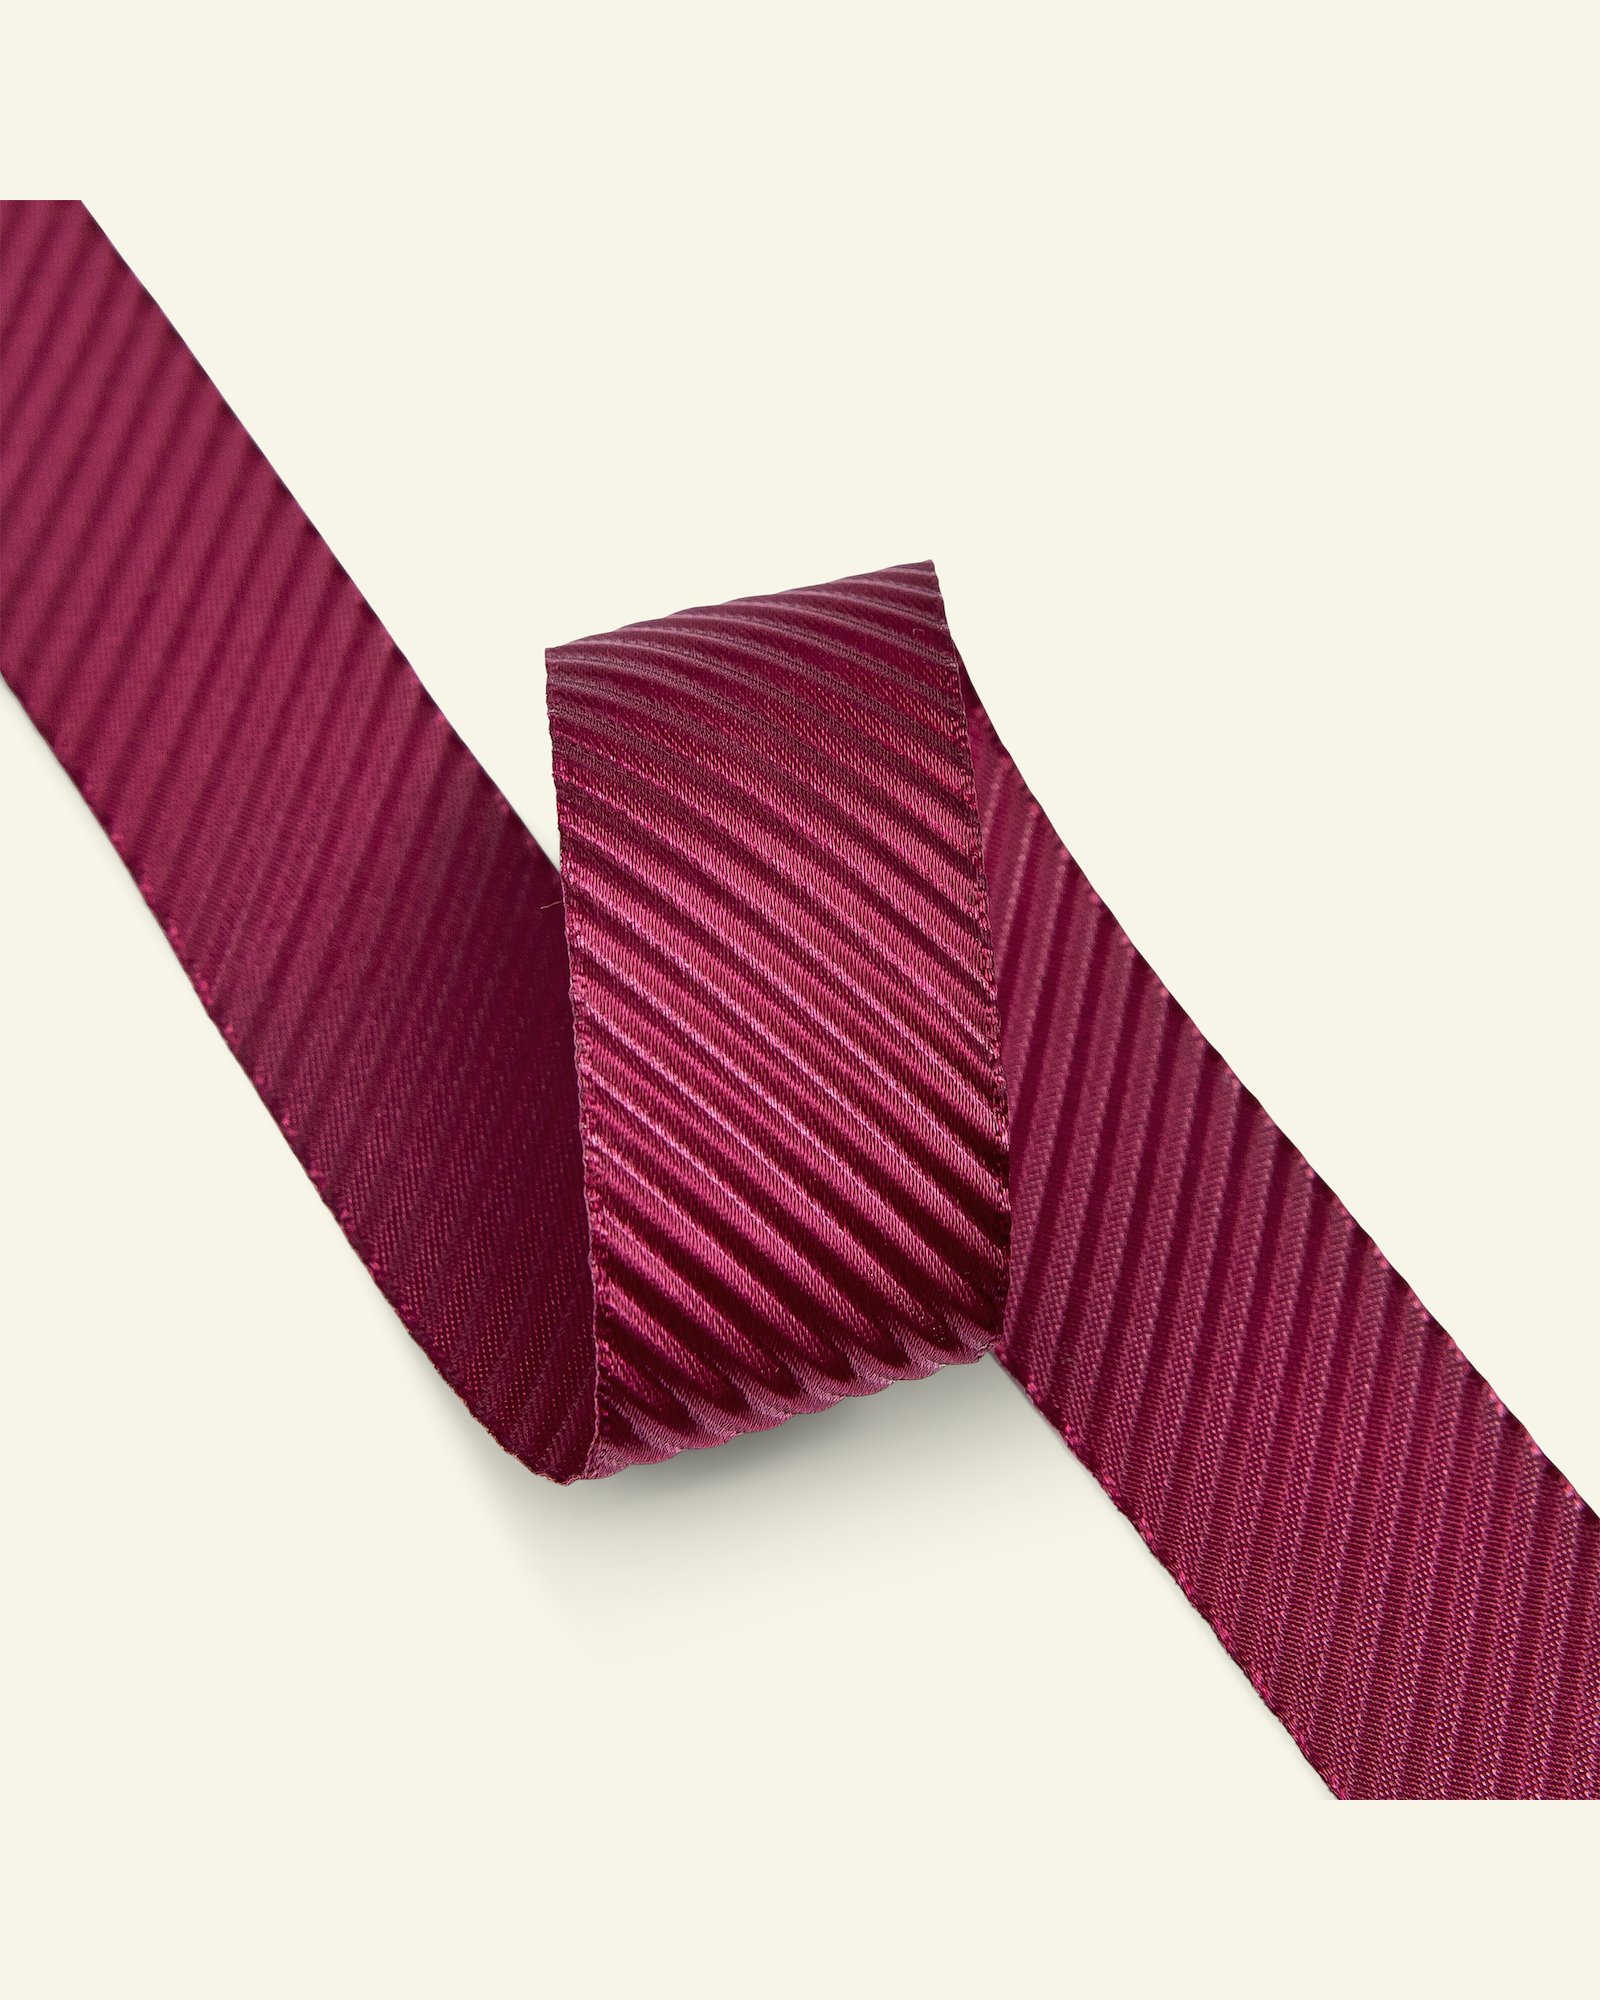 Band räfflat 27mm bordeaux 3m 21390_pack